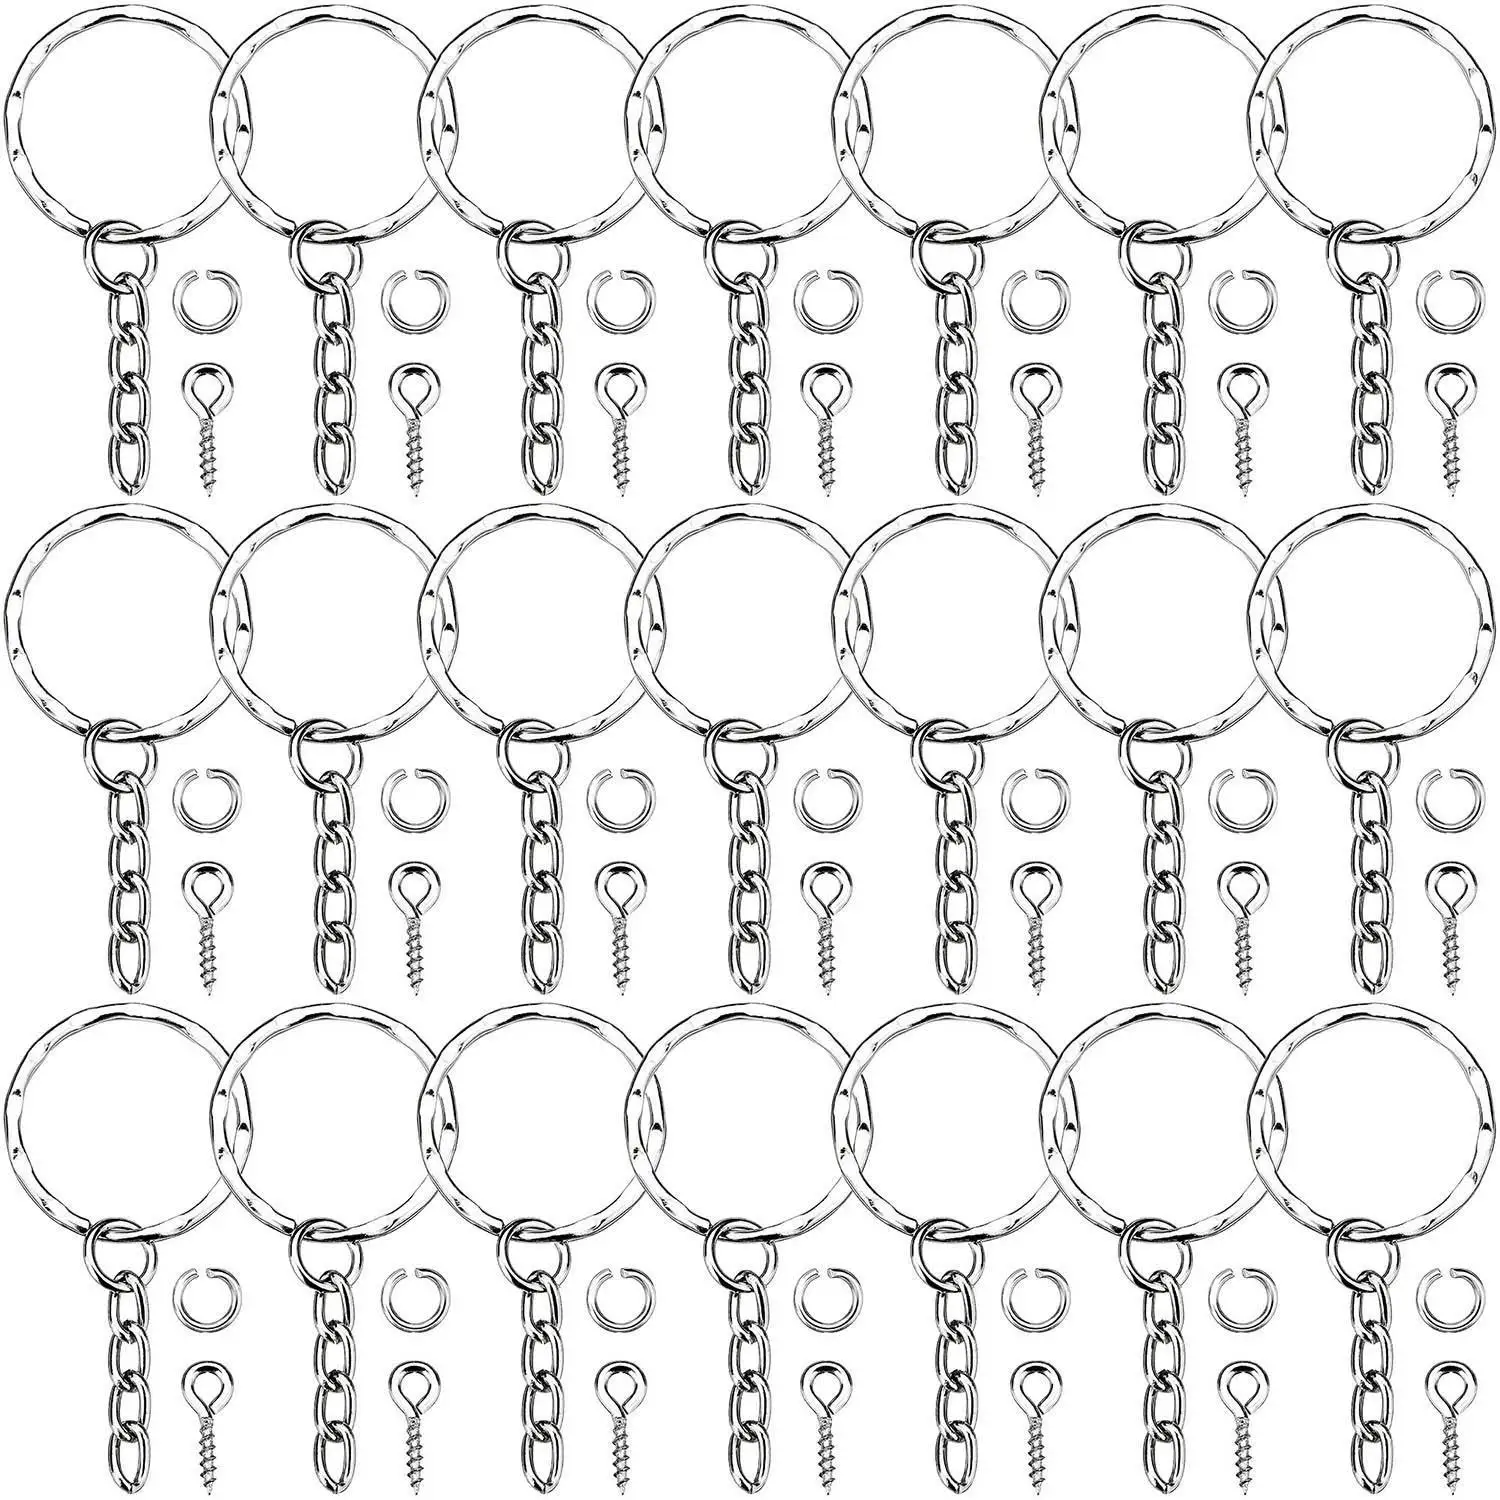 

63pcs/set Key Chains Key Ring Key Ring Findings Clasps with Eye Pin Open Jump Ring fro DIY Crafts Jewelry Making Accessory